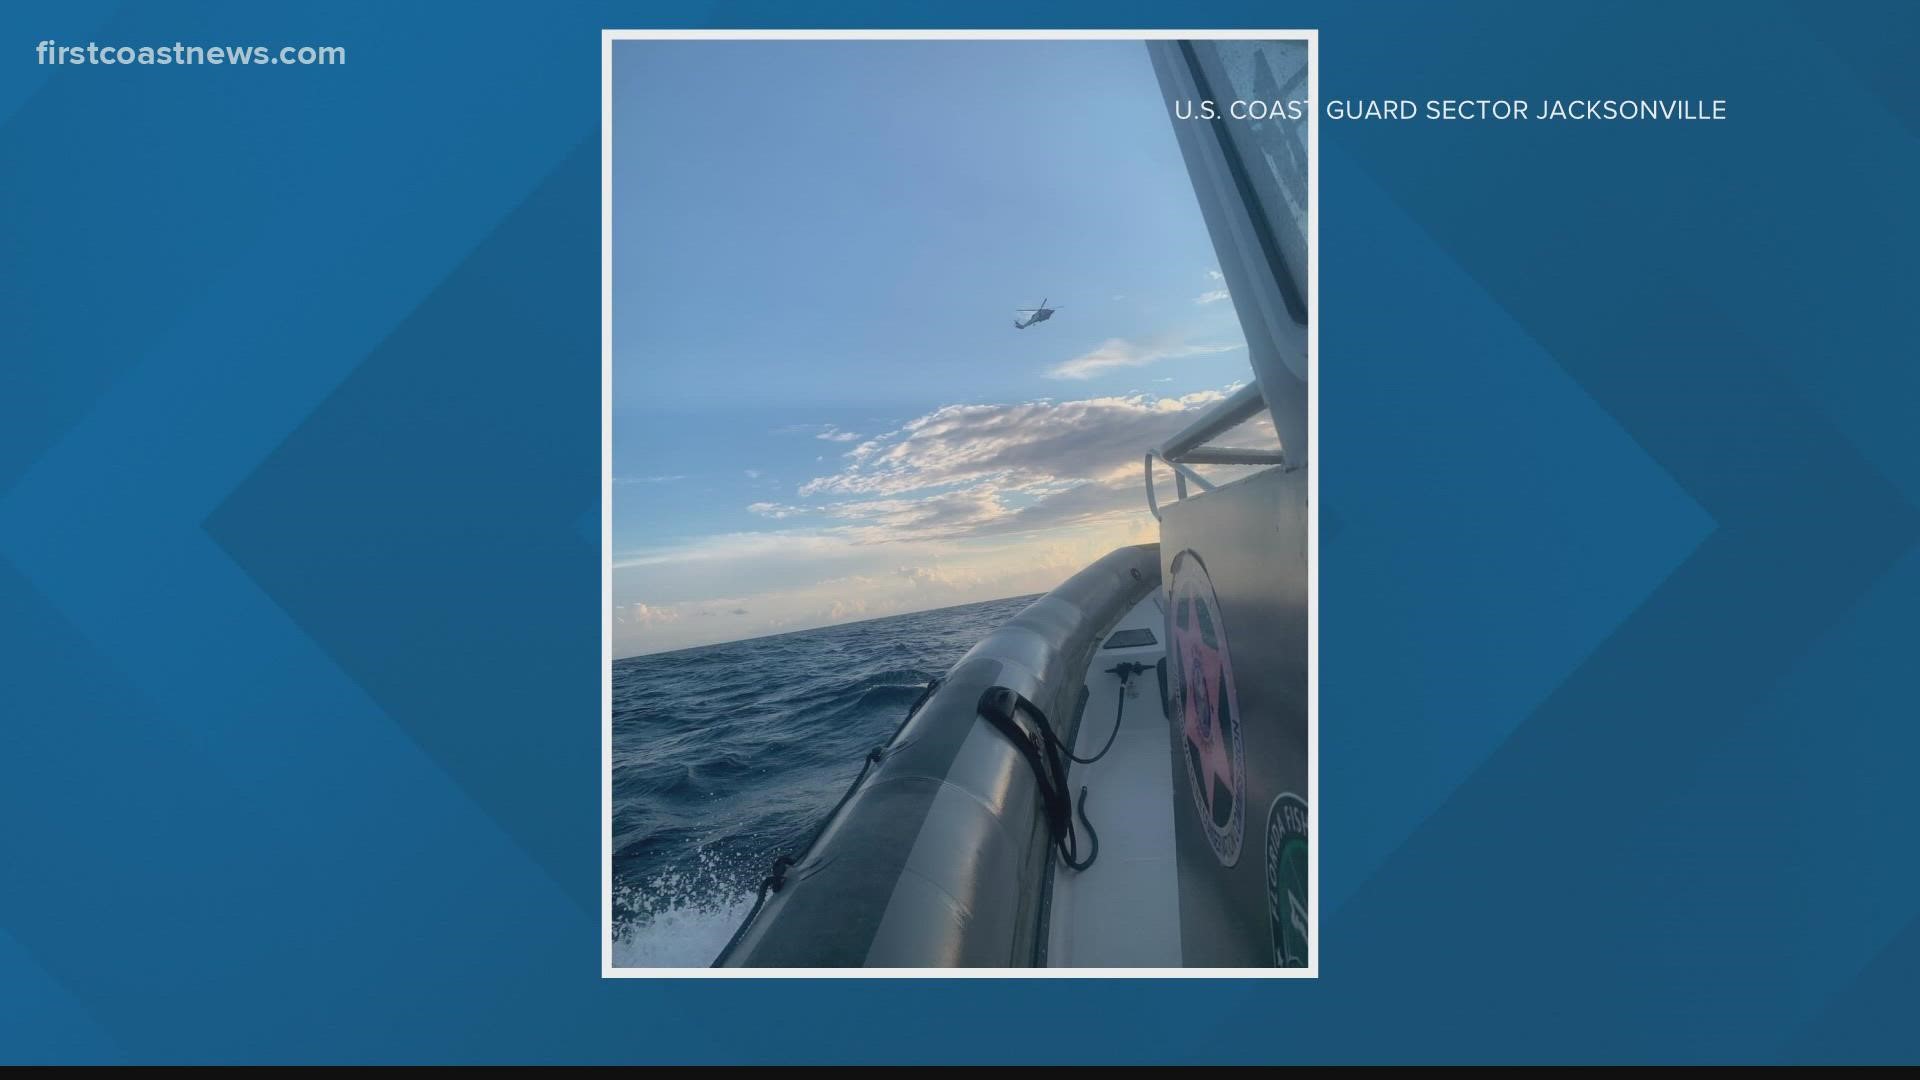 The search for Jim Evans began 30 nautical miles east of Daytona Beach on Friday.